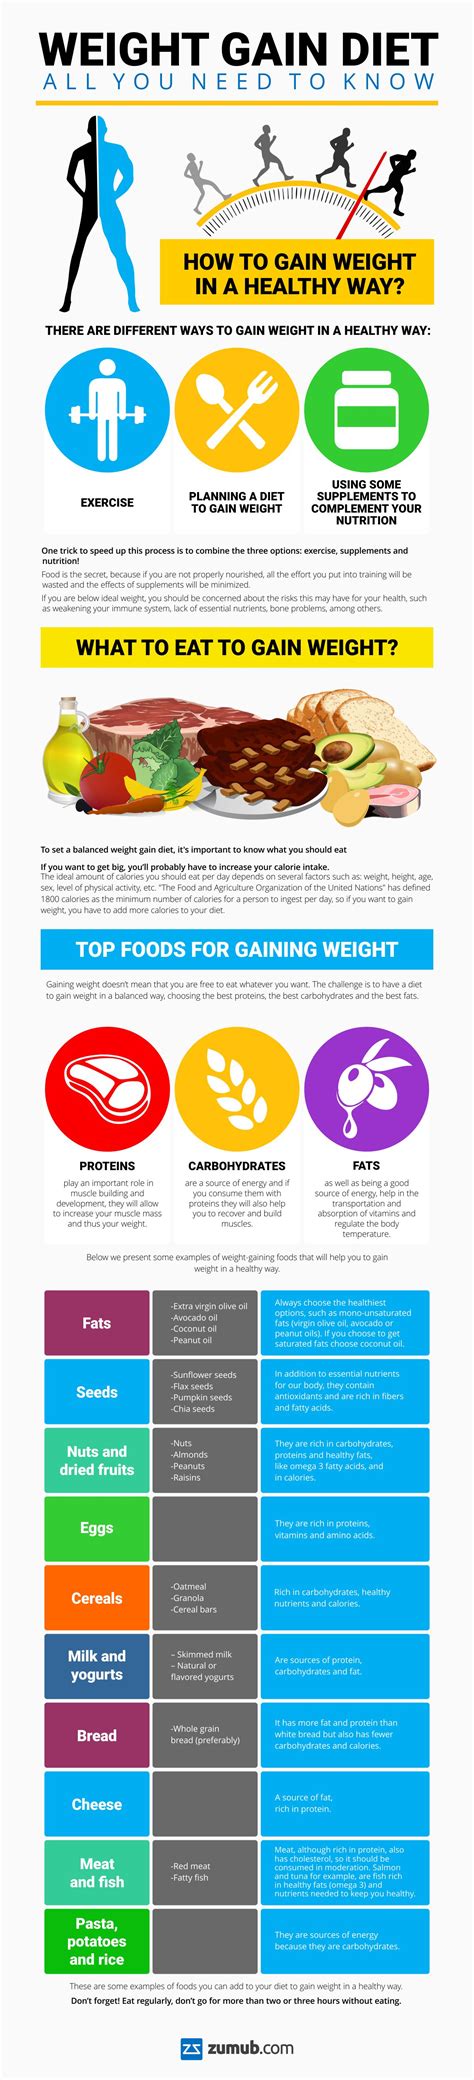 Weight Gain Diet All You Need To Know